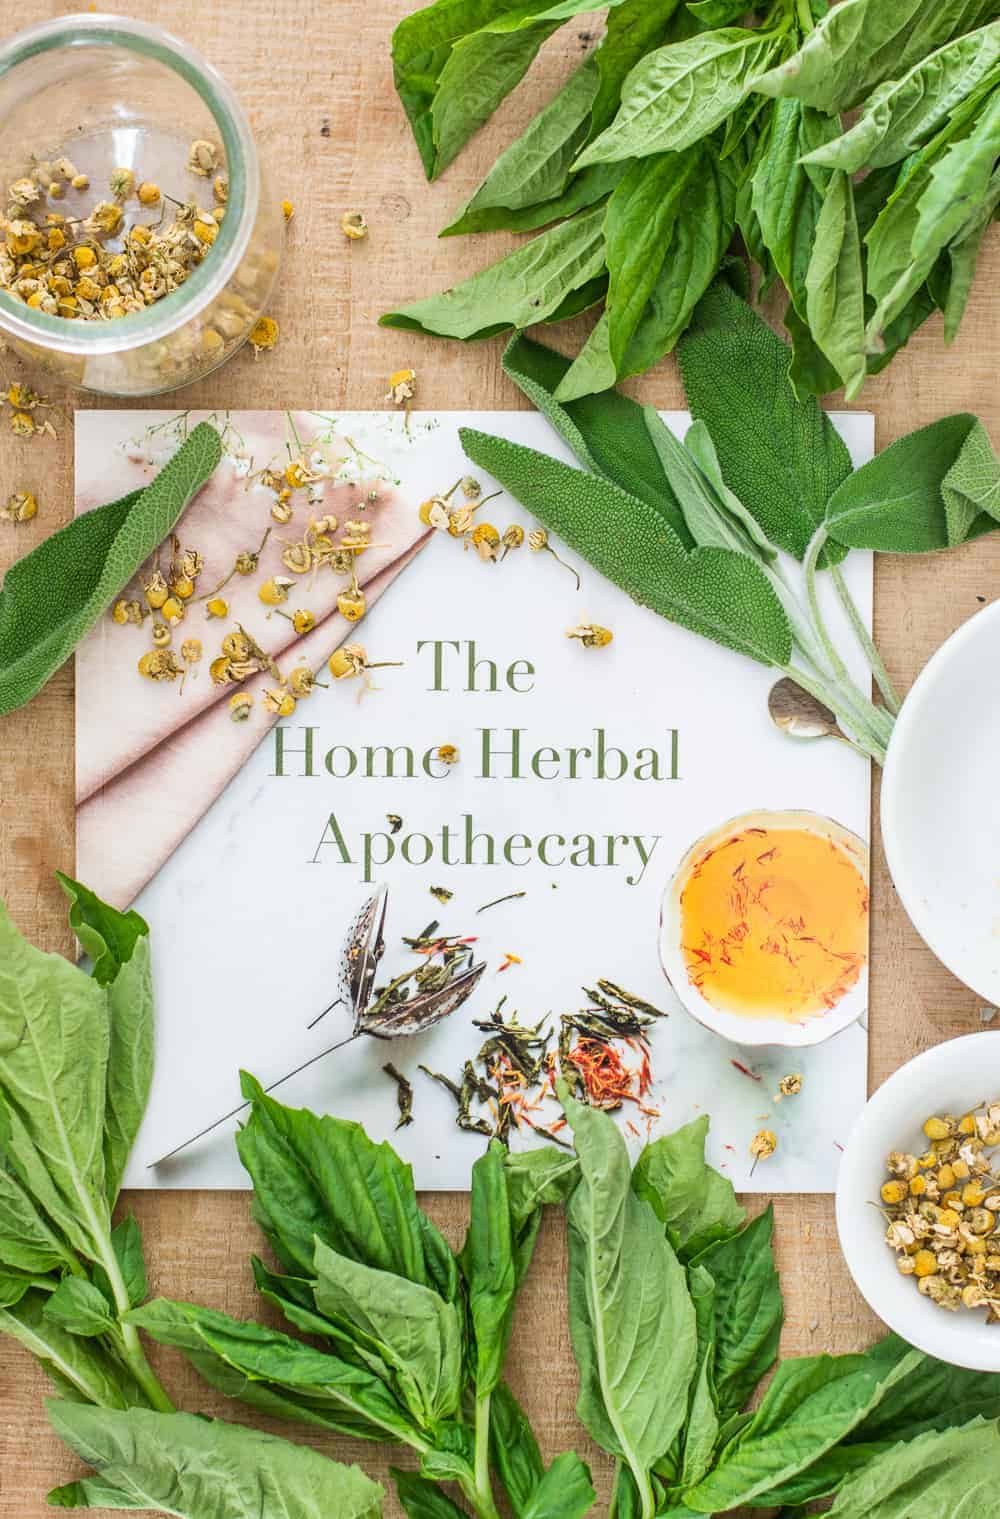 3 Home Remedies for Cold + Common Ailments | Home Remedies | Home Remedies for Colds | Sore Throat Home Remedies | Home Remedies to Boost Your Immune System | Immune Boosting Home Remedies | How to Make Your Own Materia Medica | Home Herbal Apothecary | Holistic Wellness | Herbal Medicine || The Butter Half #holisticwellness #thebutterhalf